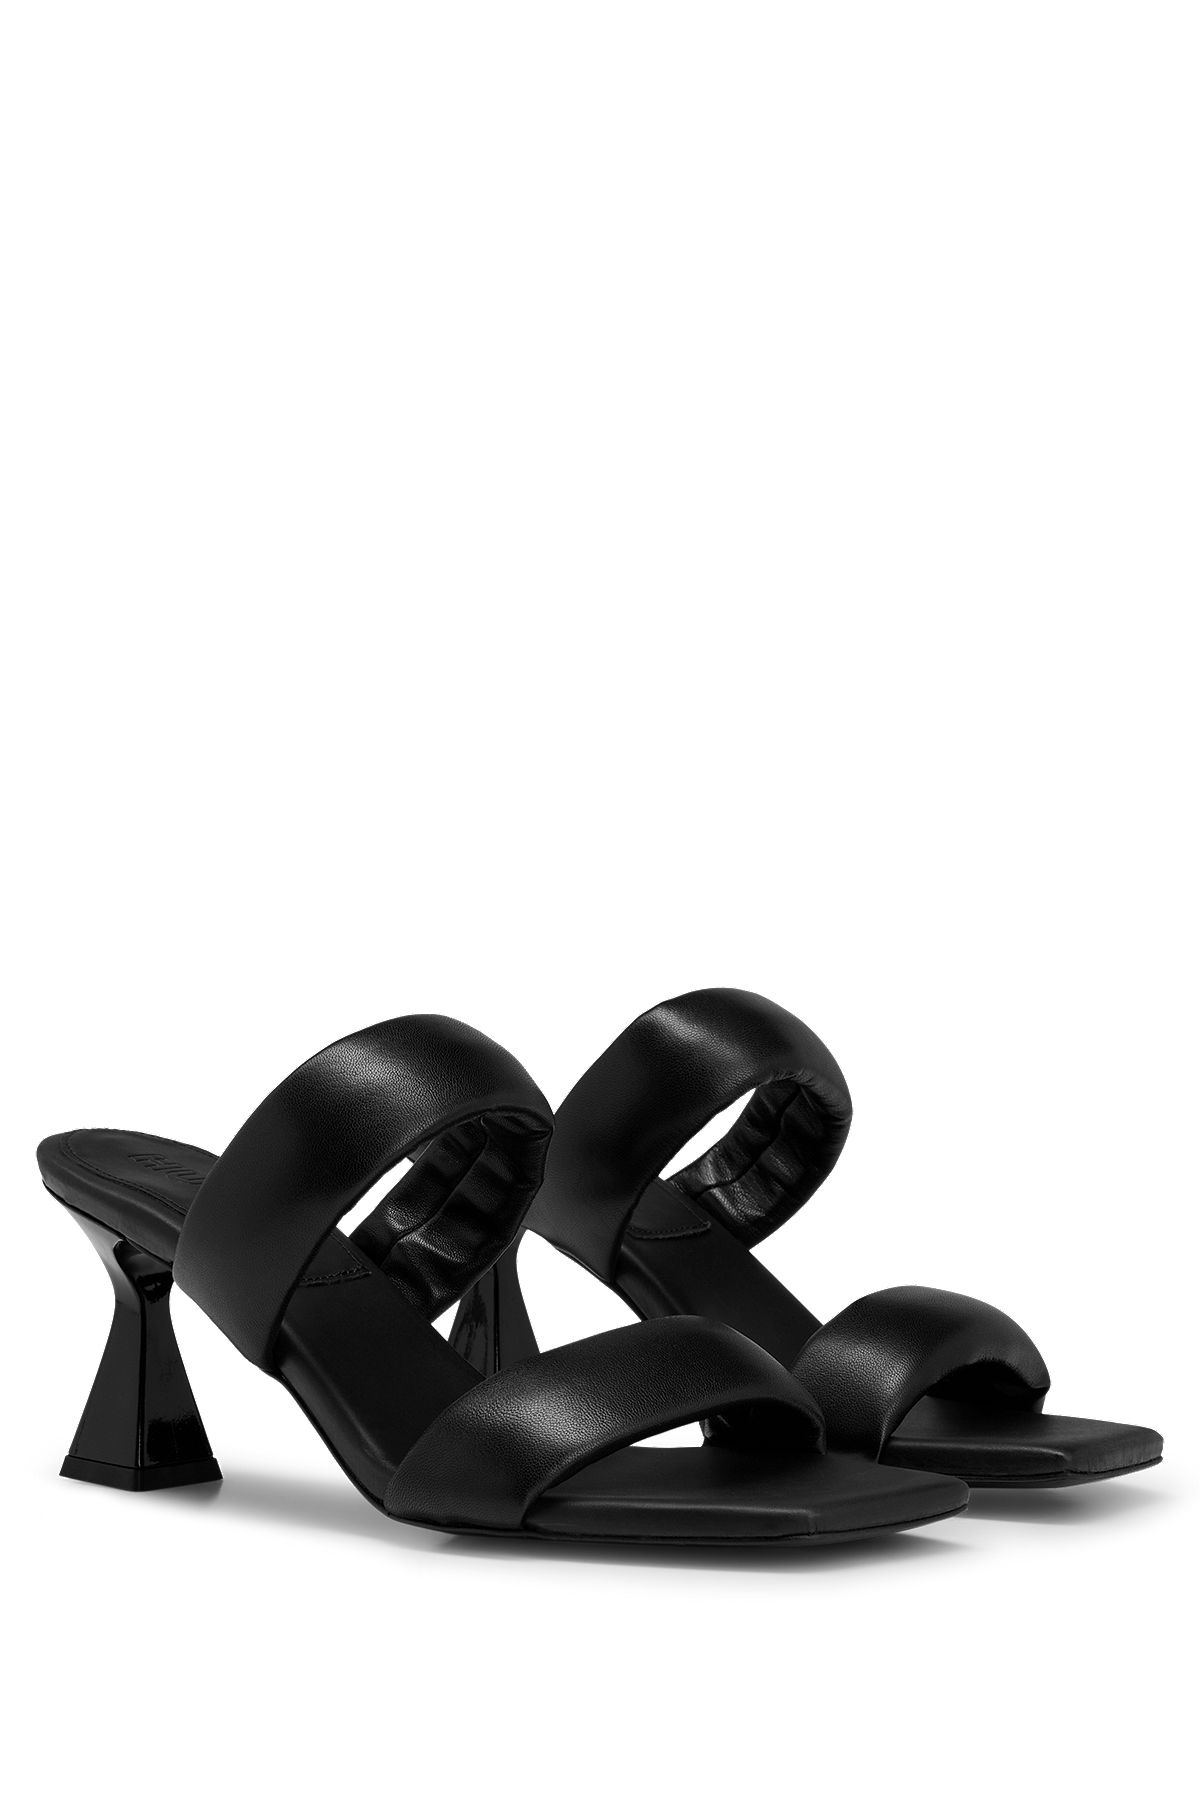 Nappa-leather sandals with flared heel, Black